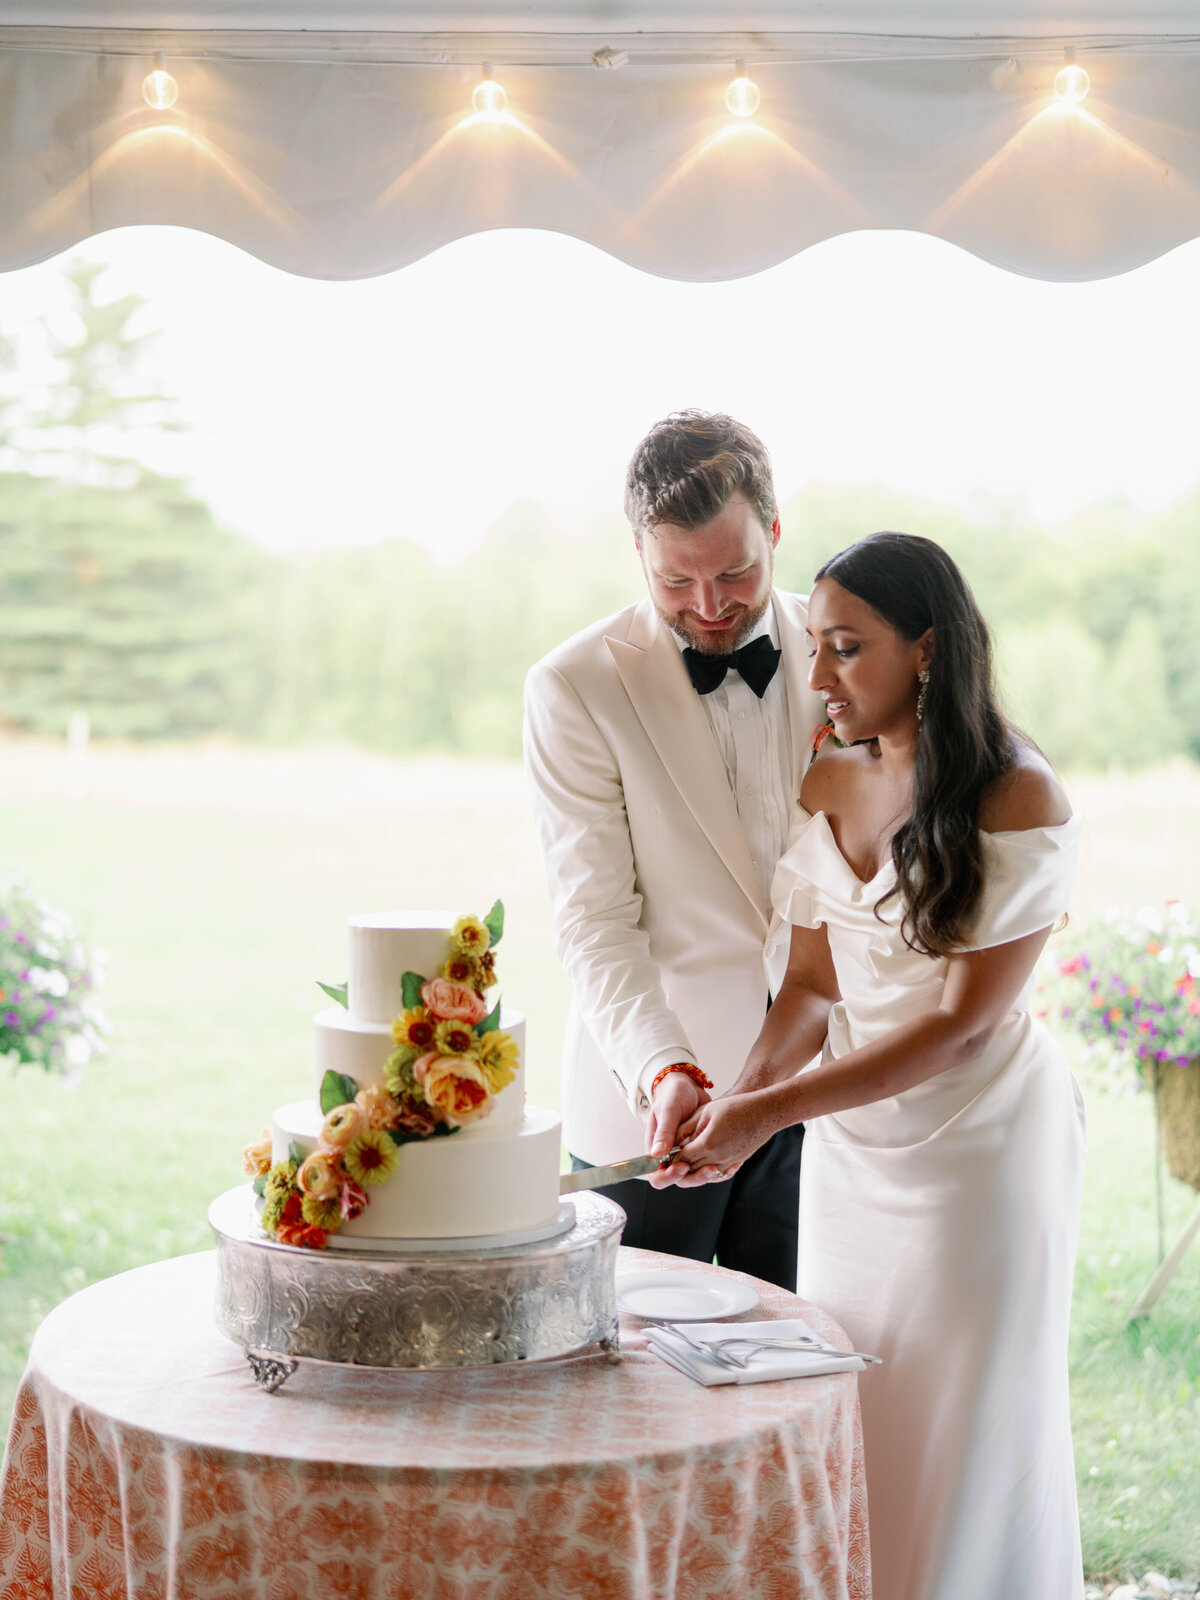 Liz Andolina Photography Destination Wedding Photographer in Italy, New York, Across the East Coast Editorial, heritage-quality images for stylish couples-811